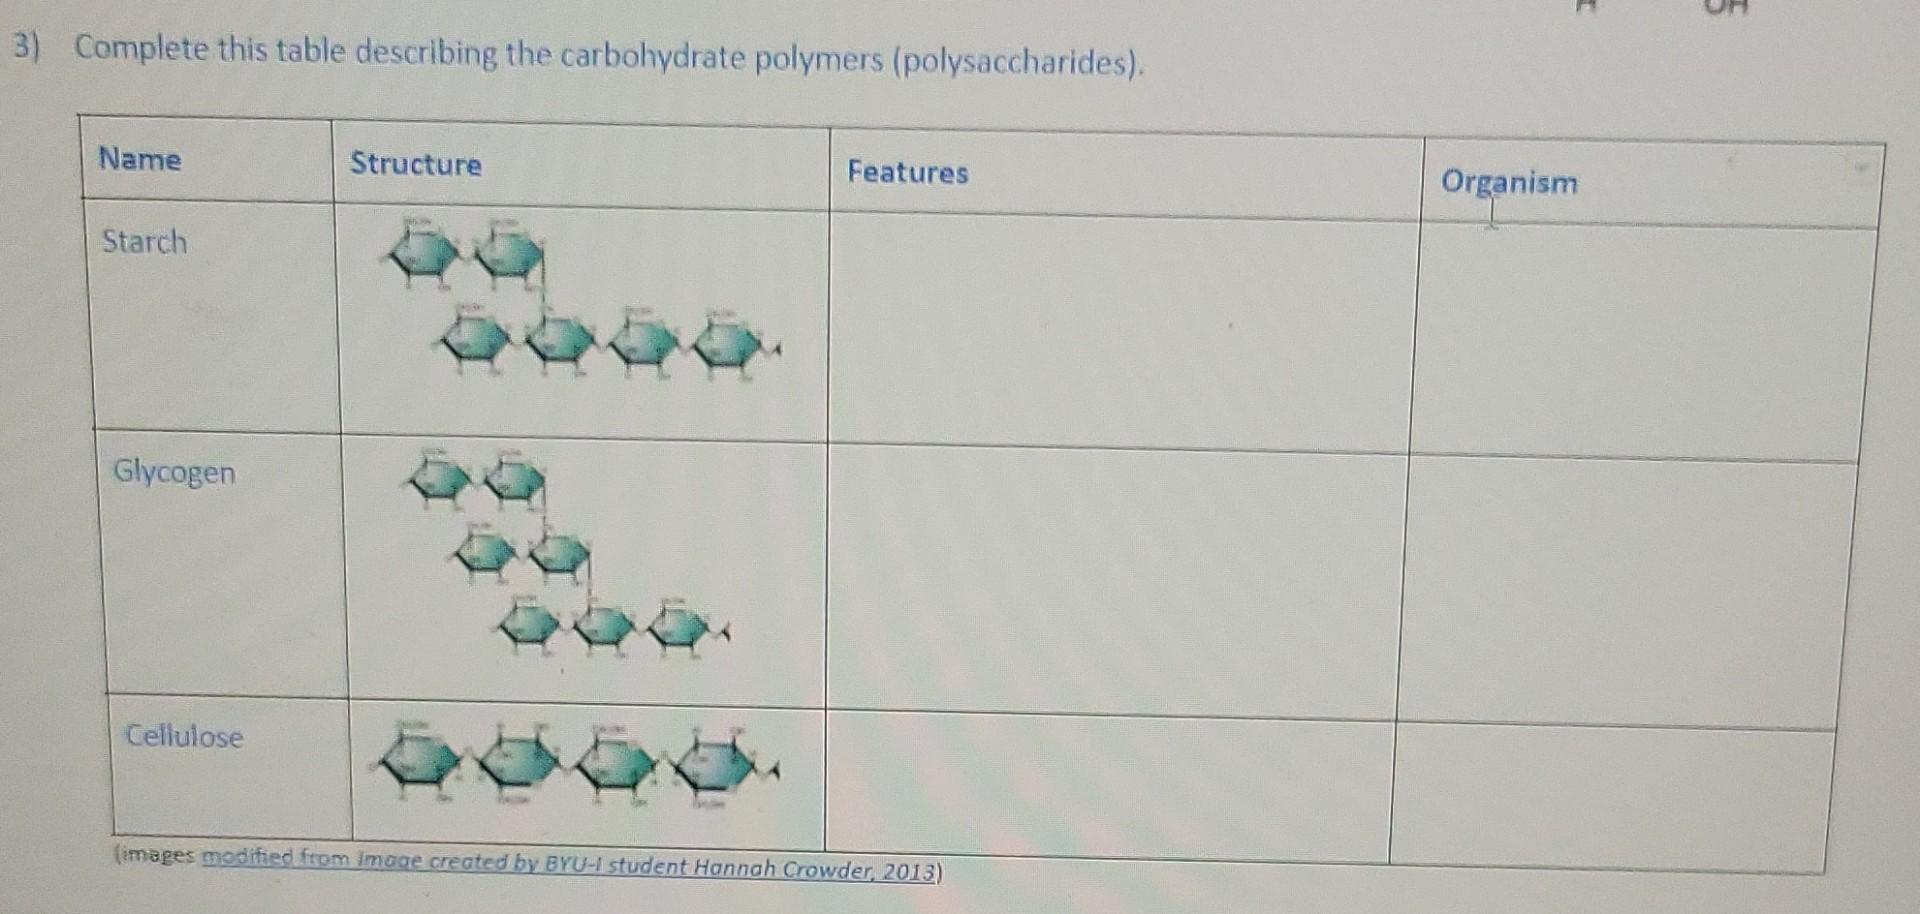 What is a Carbohydrate Polymer?